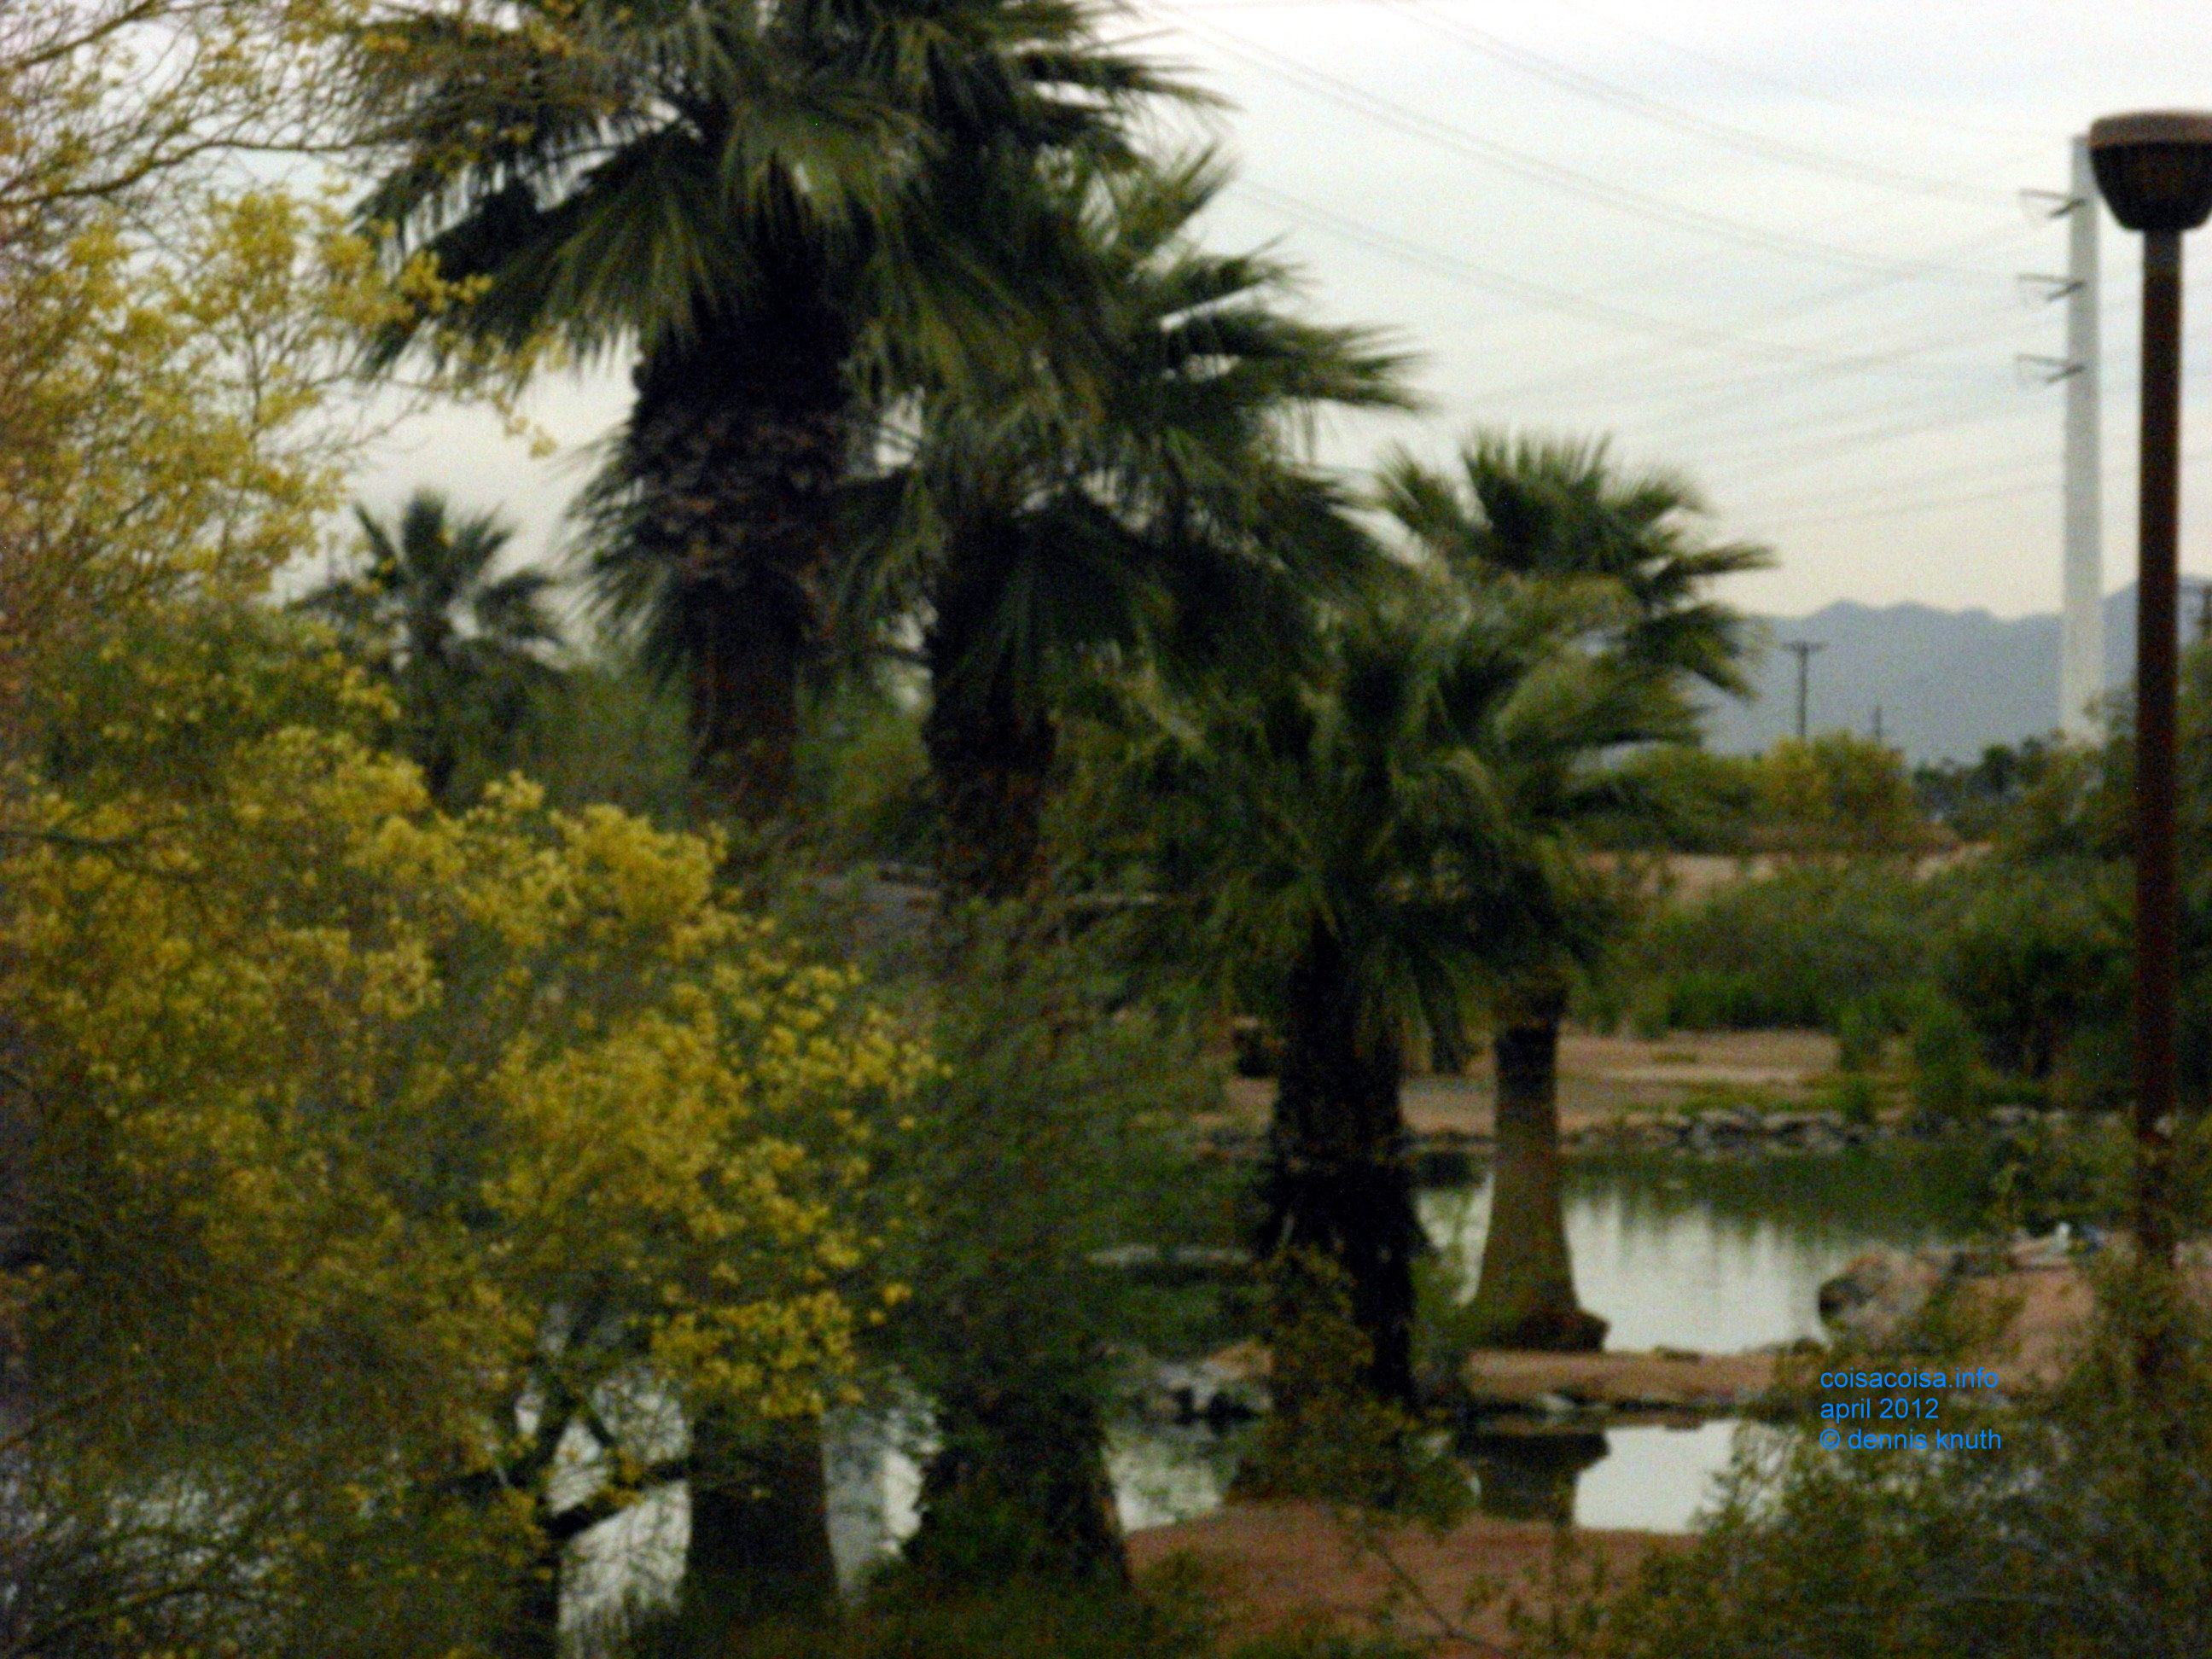 Pond in Papago Park